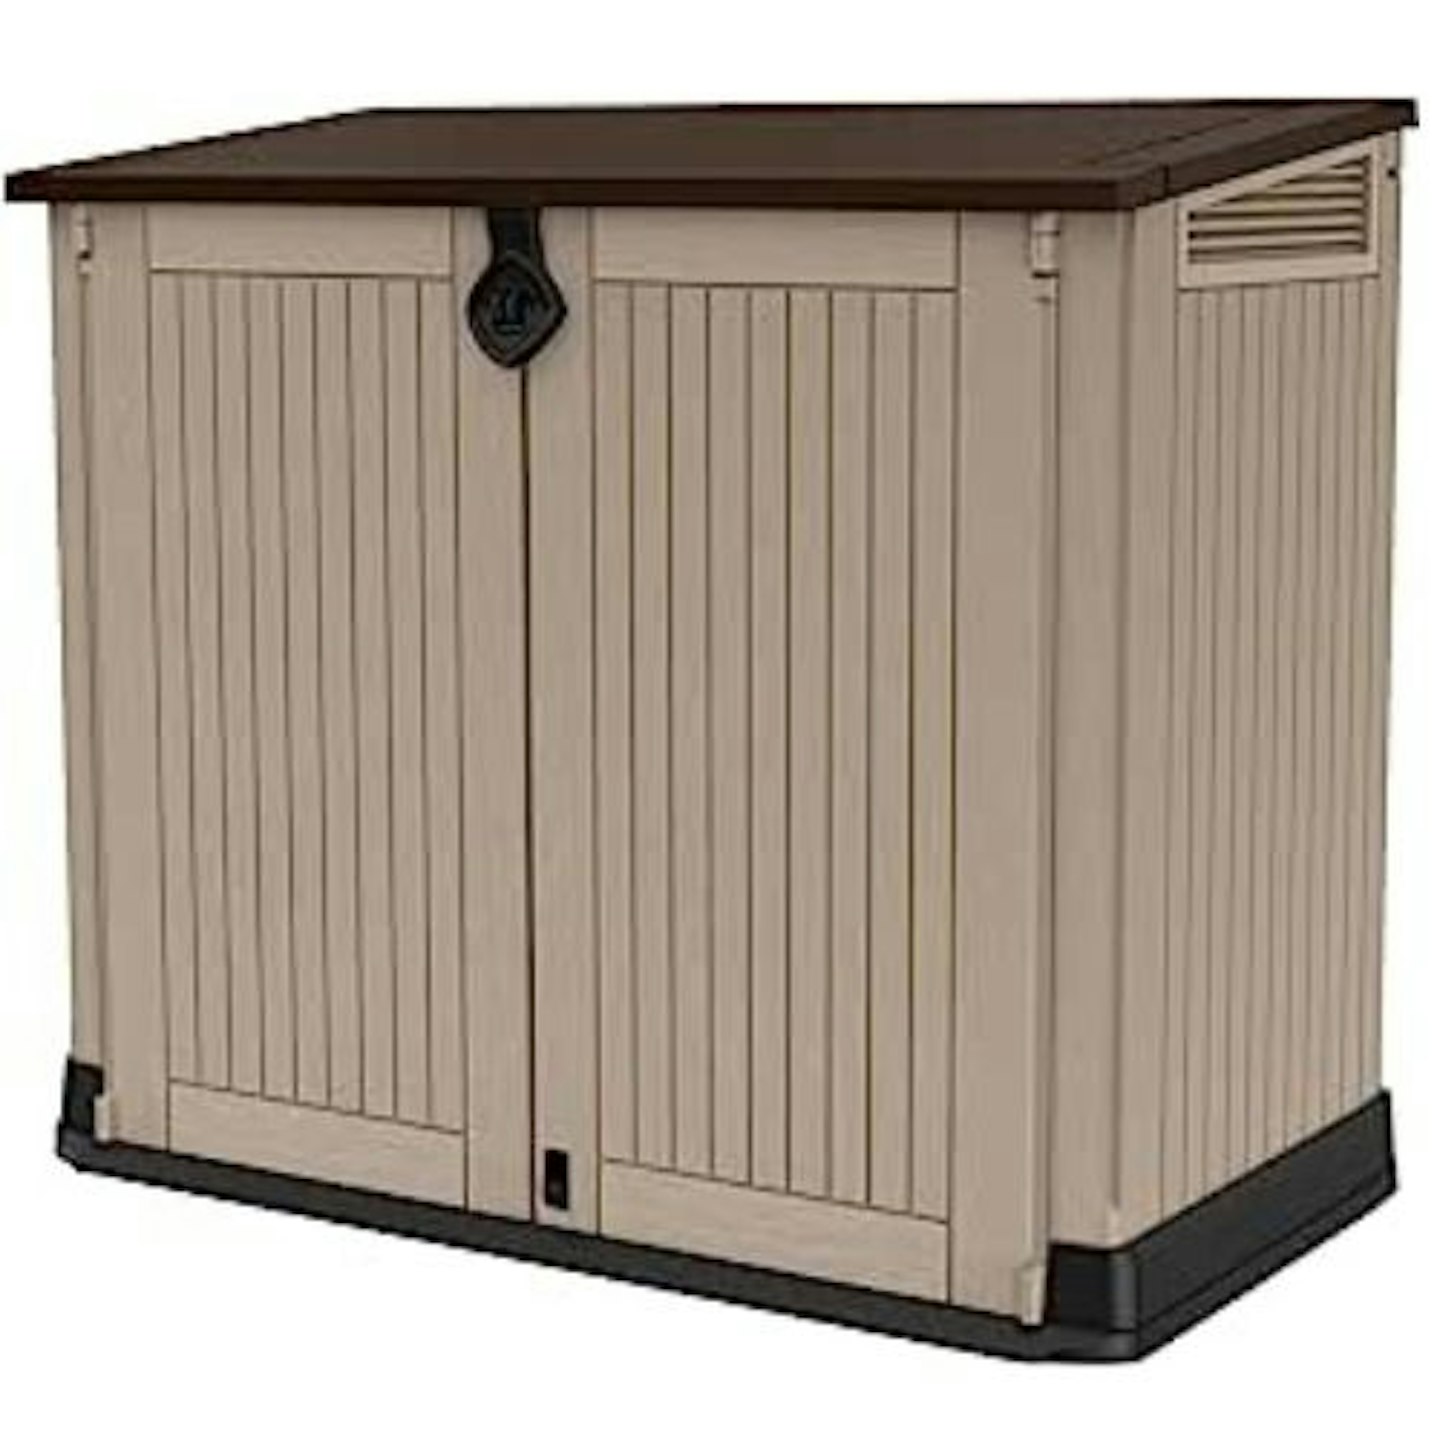 Keter Store-It Out Midi Outdoor Garden Storage Shed